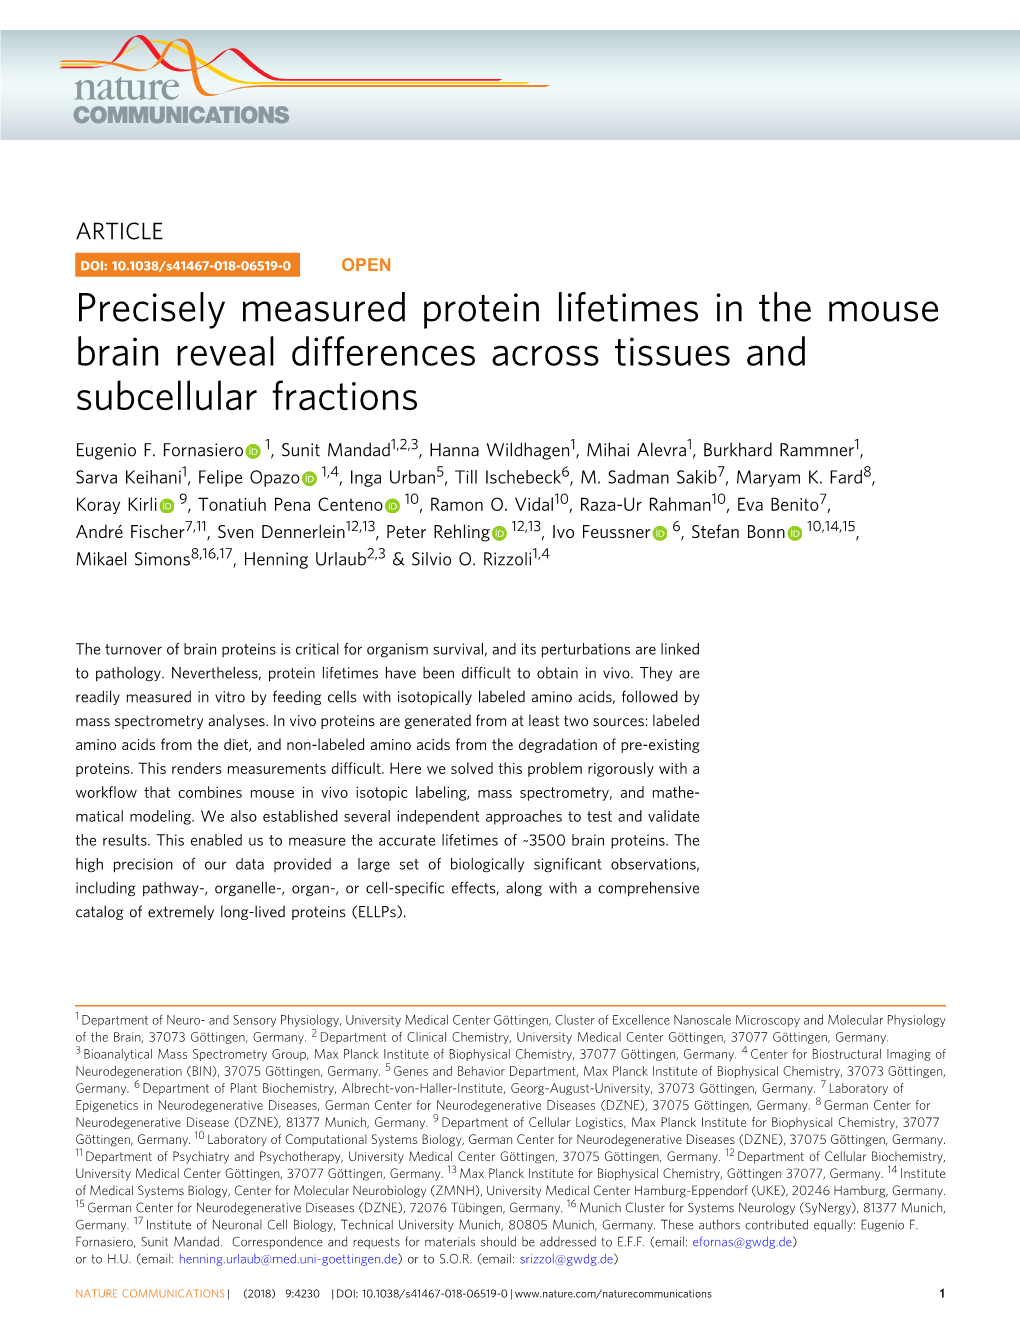 Precisely Measured Protein Lifetimes in the Mouse Brain Reveal Differences Across Tissues and Subcellular Fractions